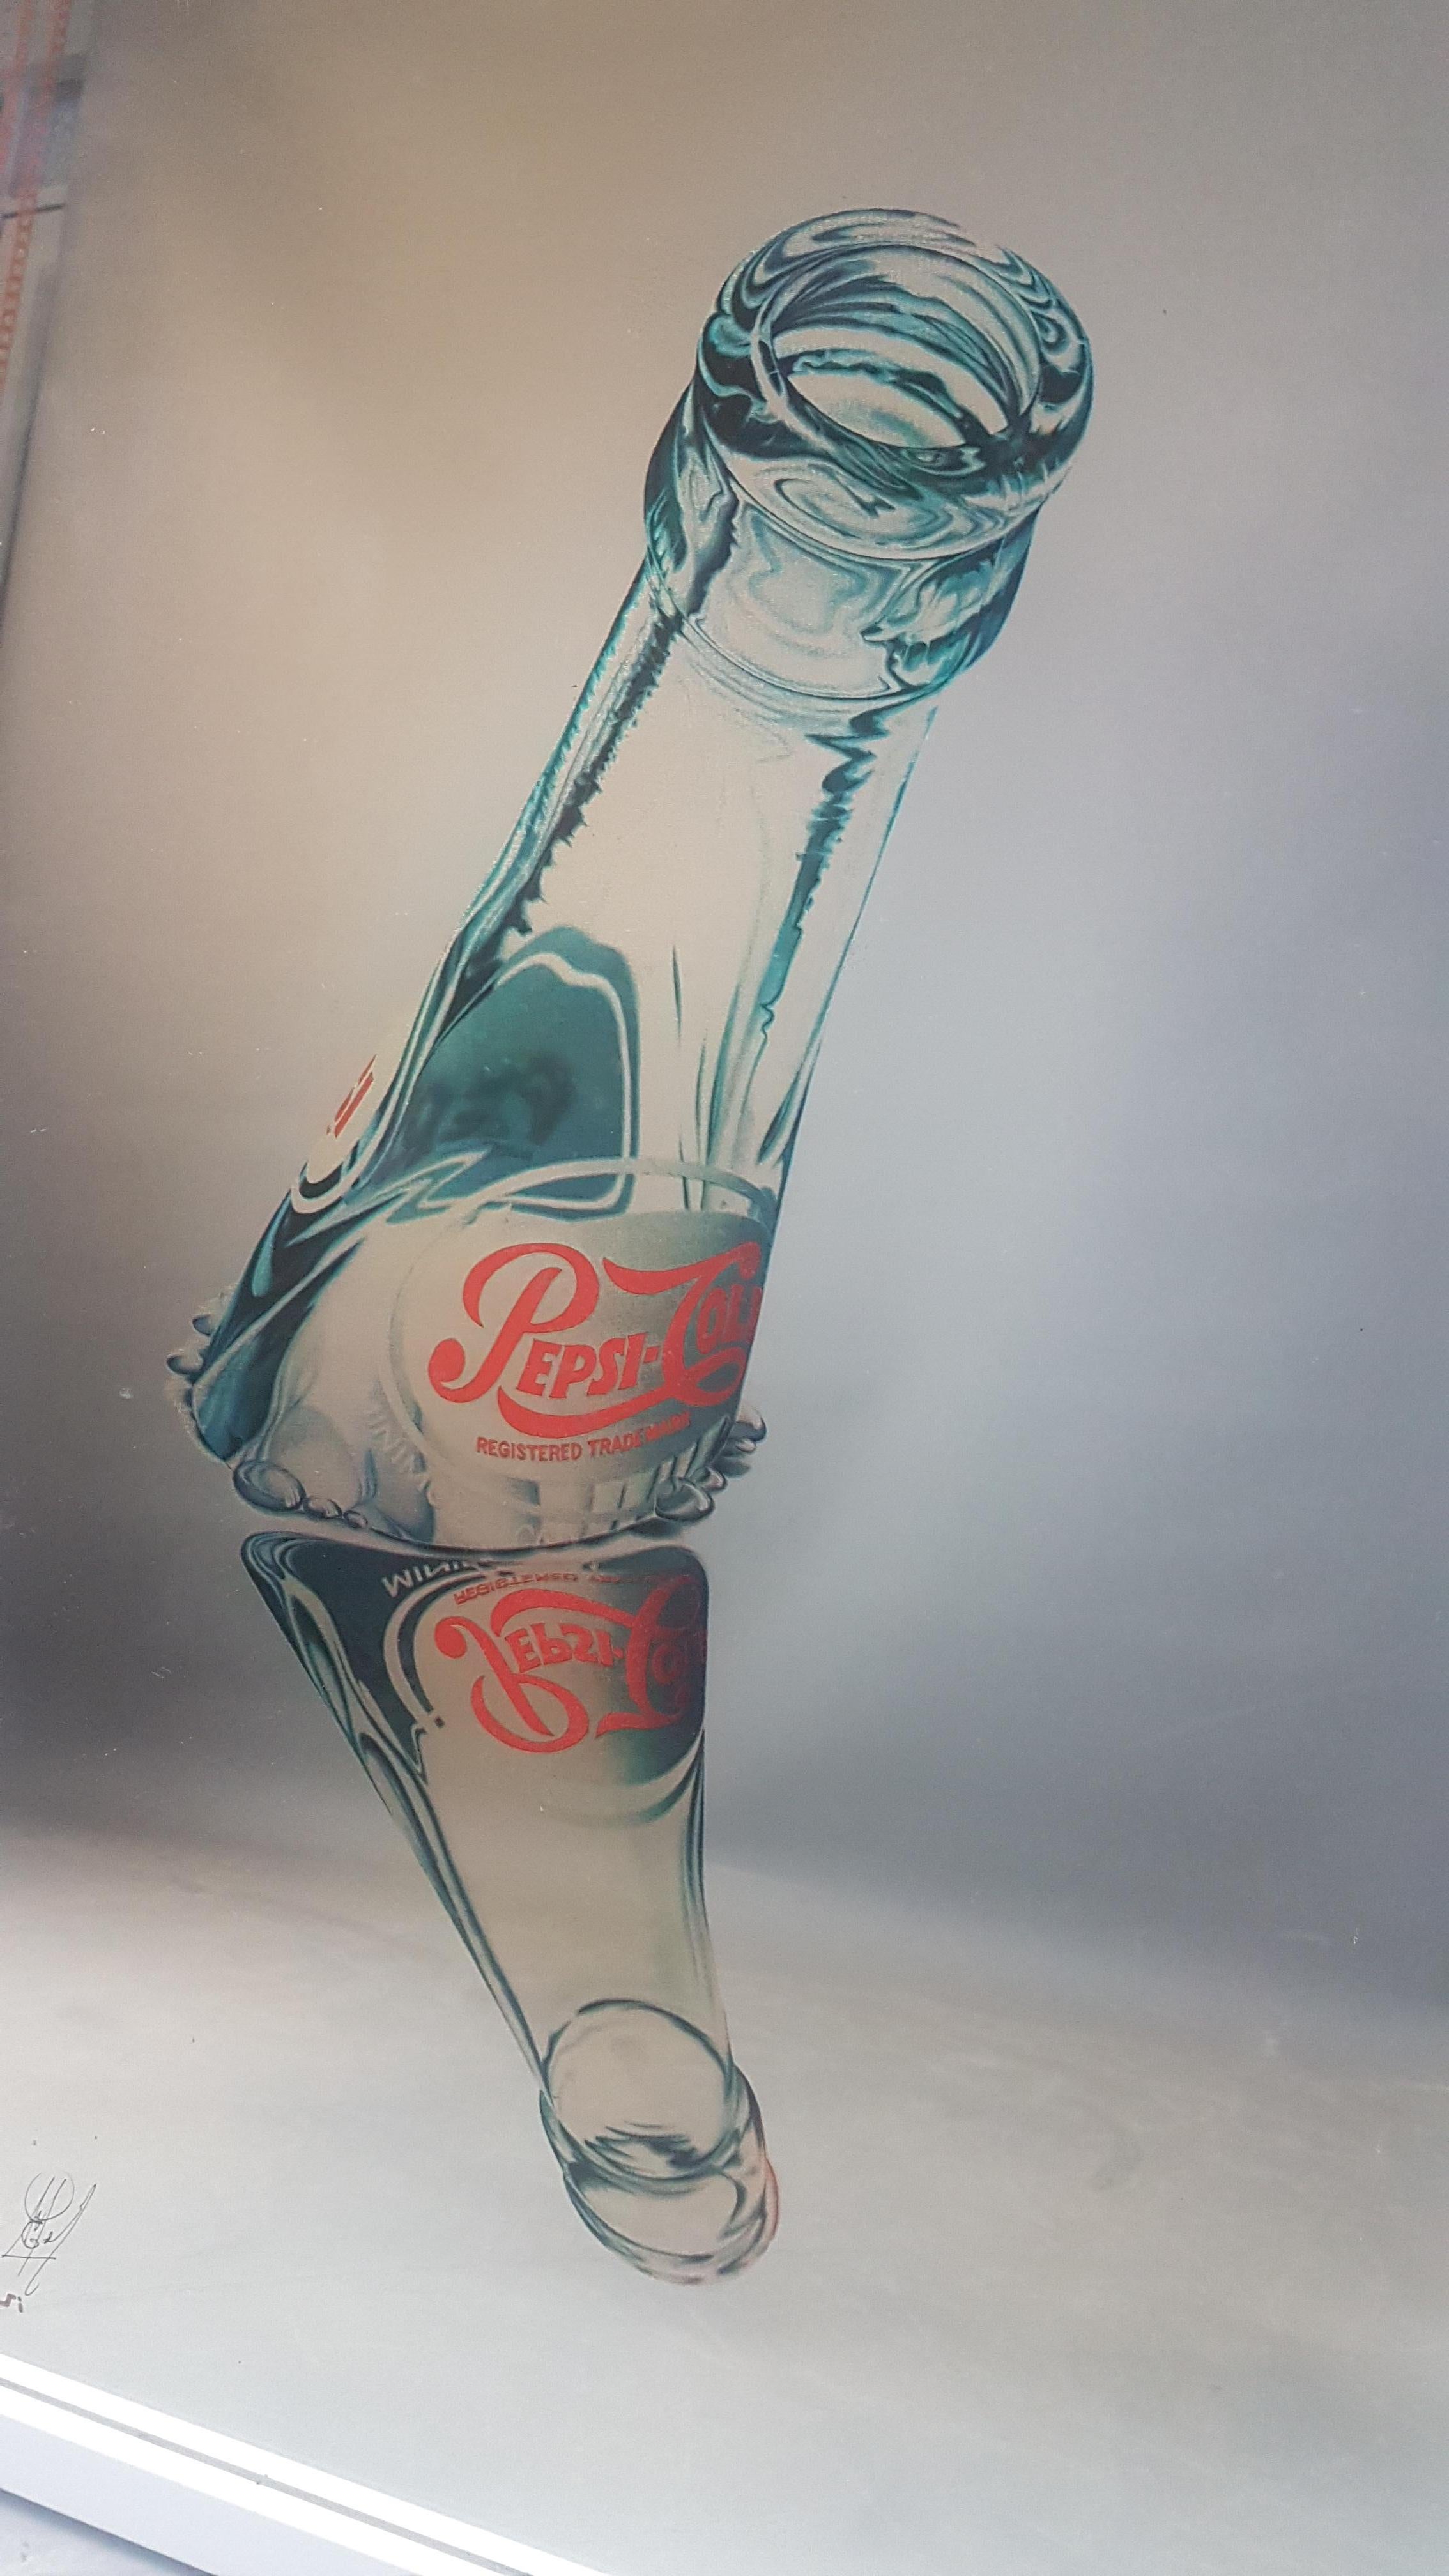 Painted Original Pepsi Cola Reverse Printed Advertising Mirror Signed by the Artist For Sale